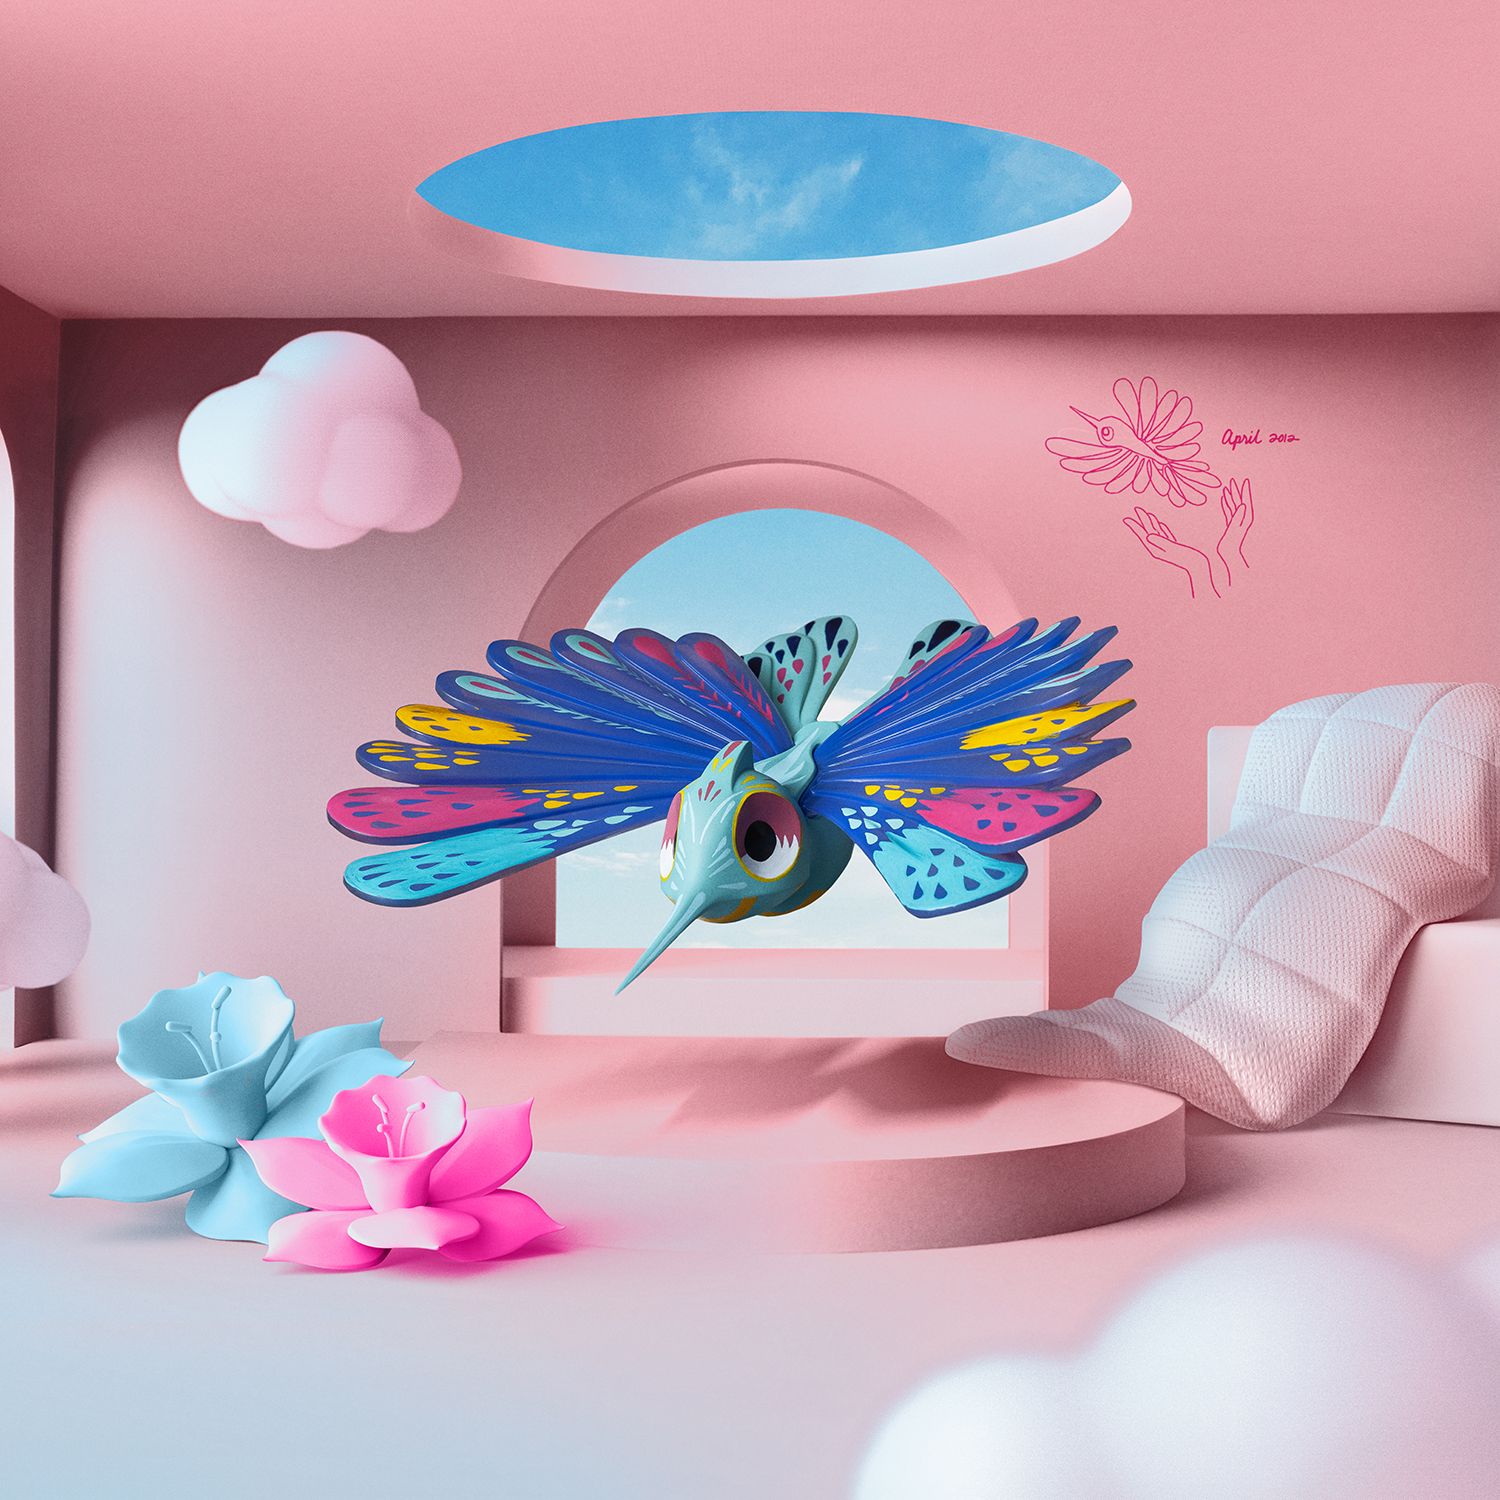 Mira hummingbird animo in a 3d pink environment with flowers and cloud